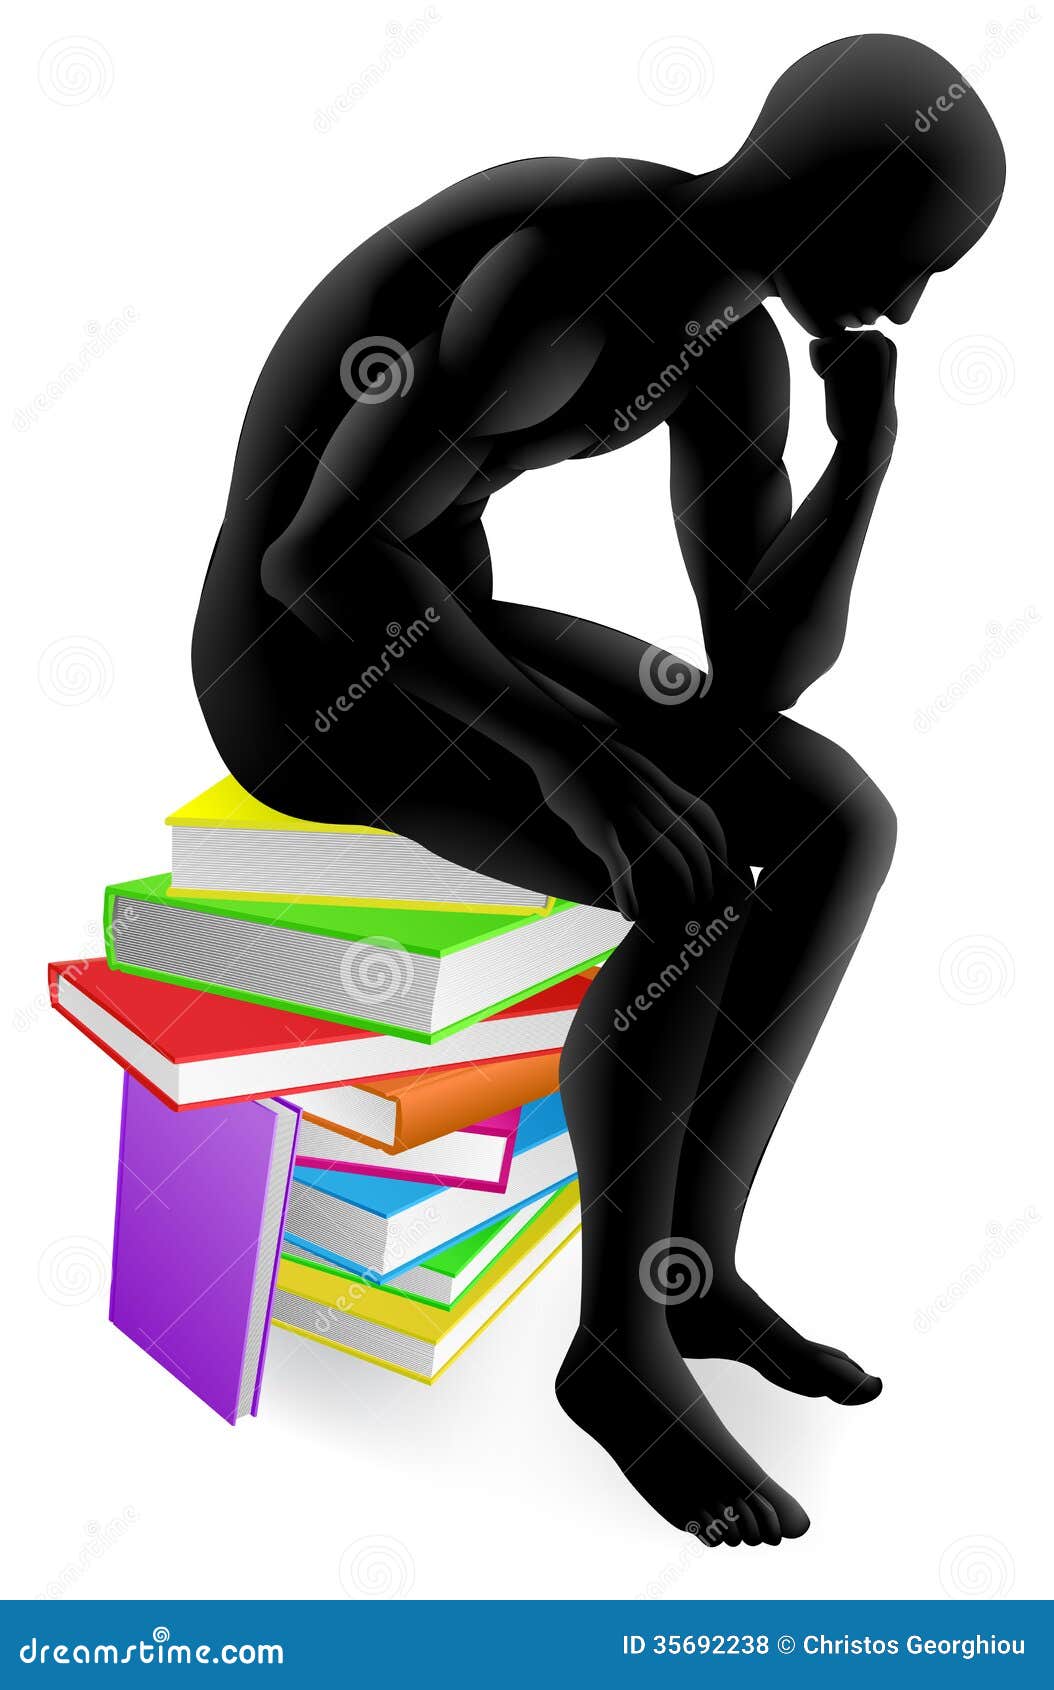 A Person Thinking In Thinker Pose While Sitting On A Pile Of Books Concept  Illustration Royalty Free SVG, Cliparts, Vectors, and Stock Illustration.  Image 24197380.